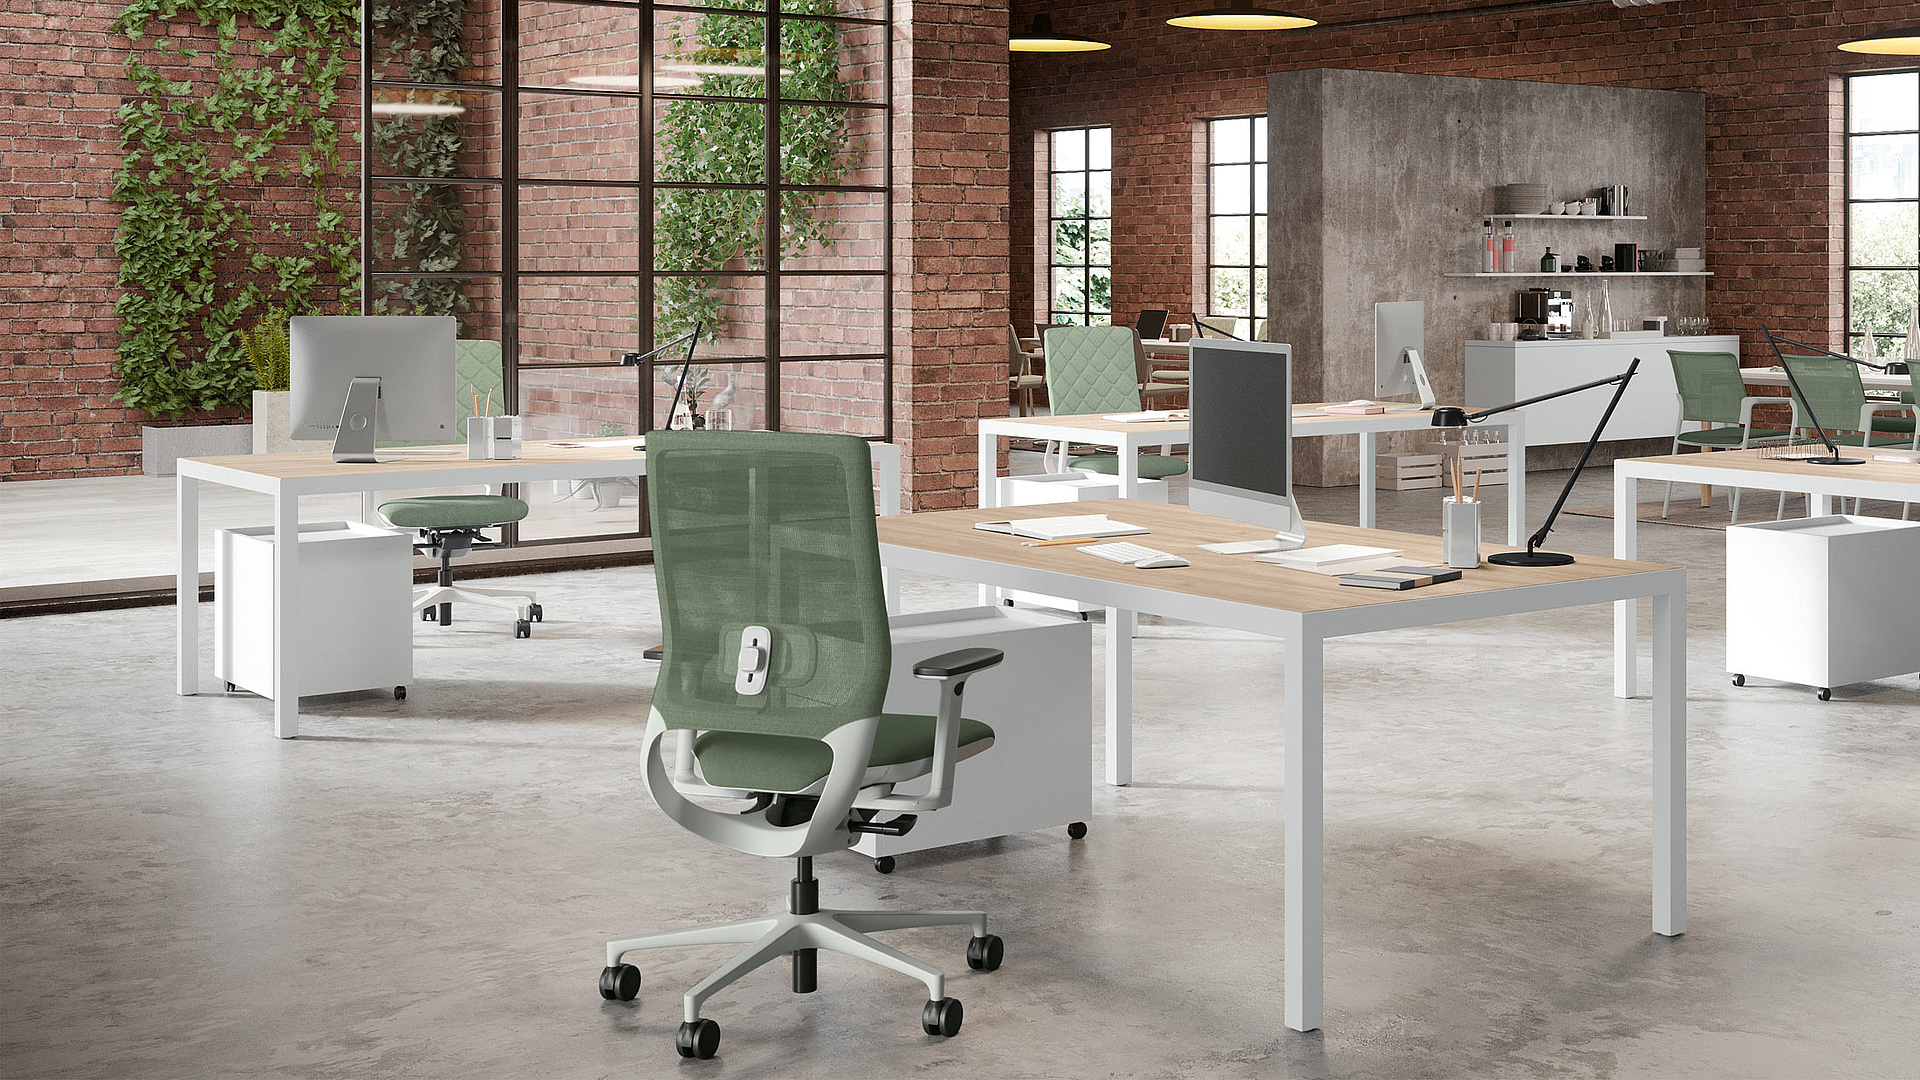 High-class office furniture and creative design styles